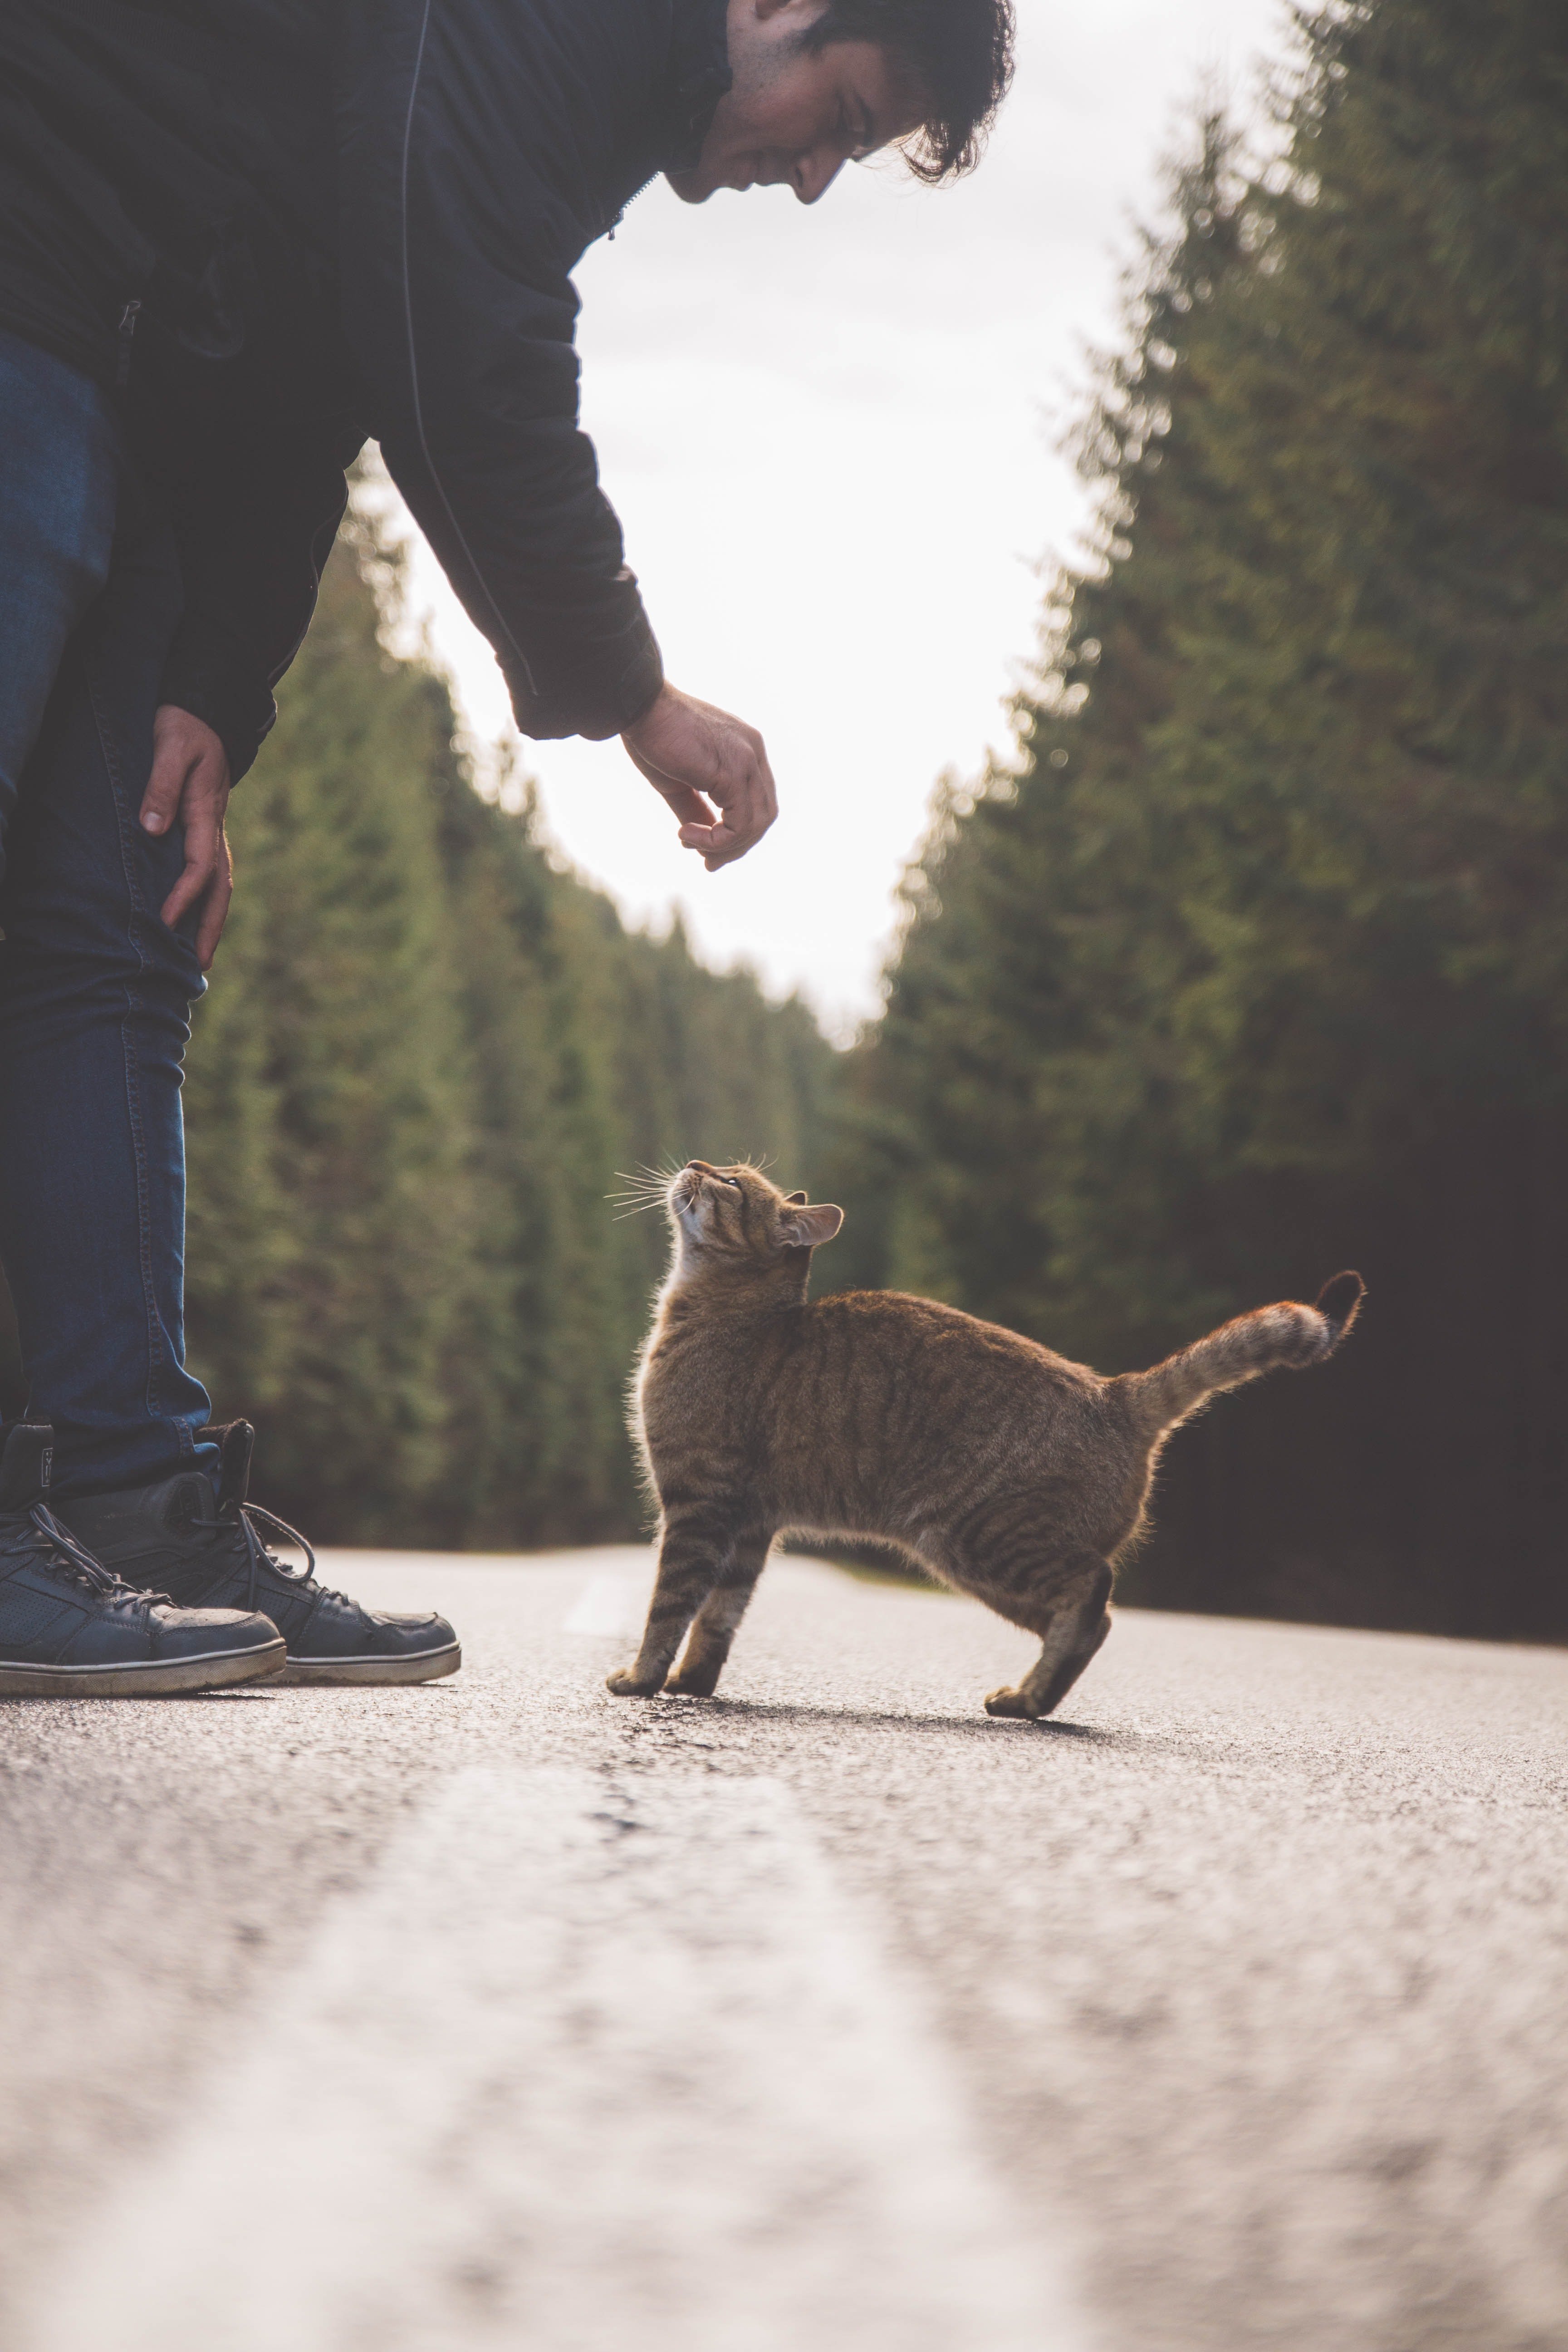 A man with a cat in the road. | Photo: Pexels